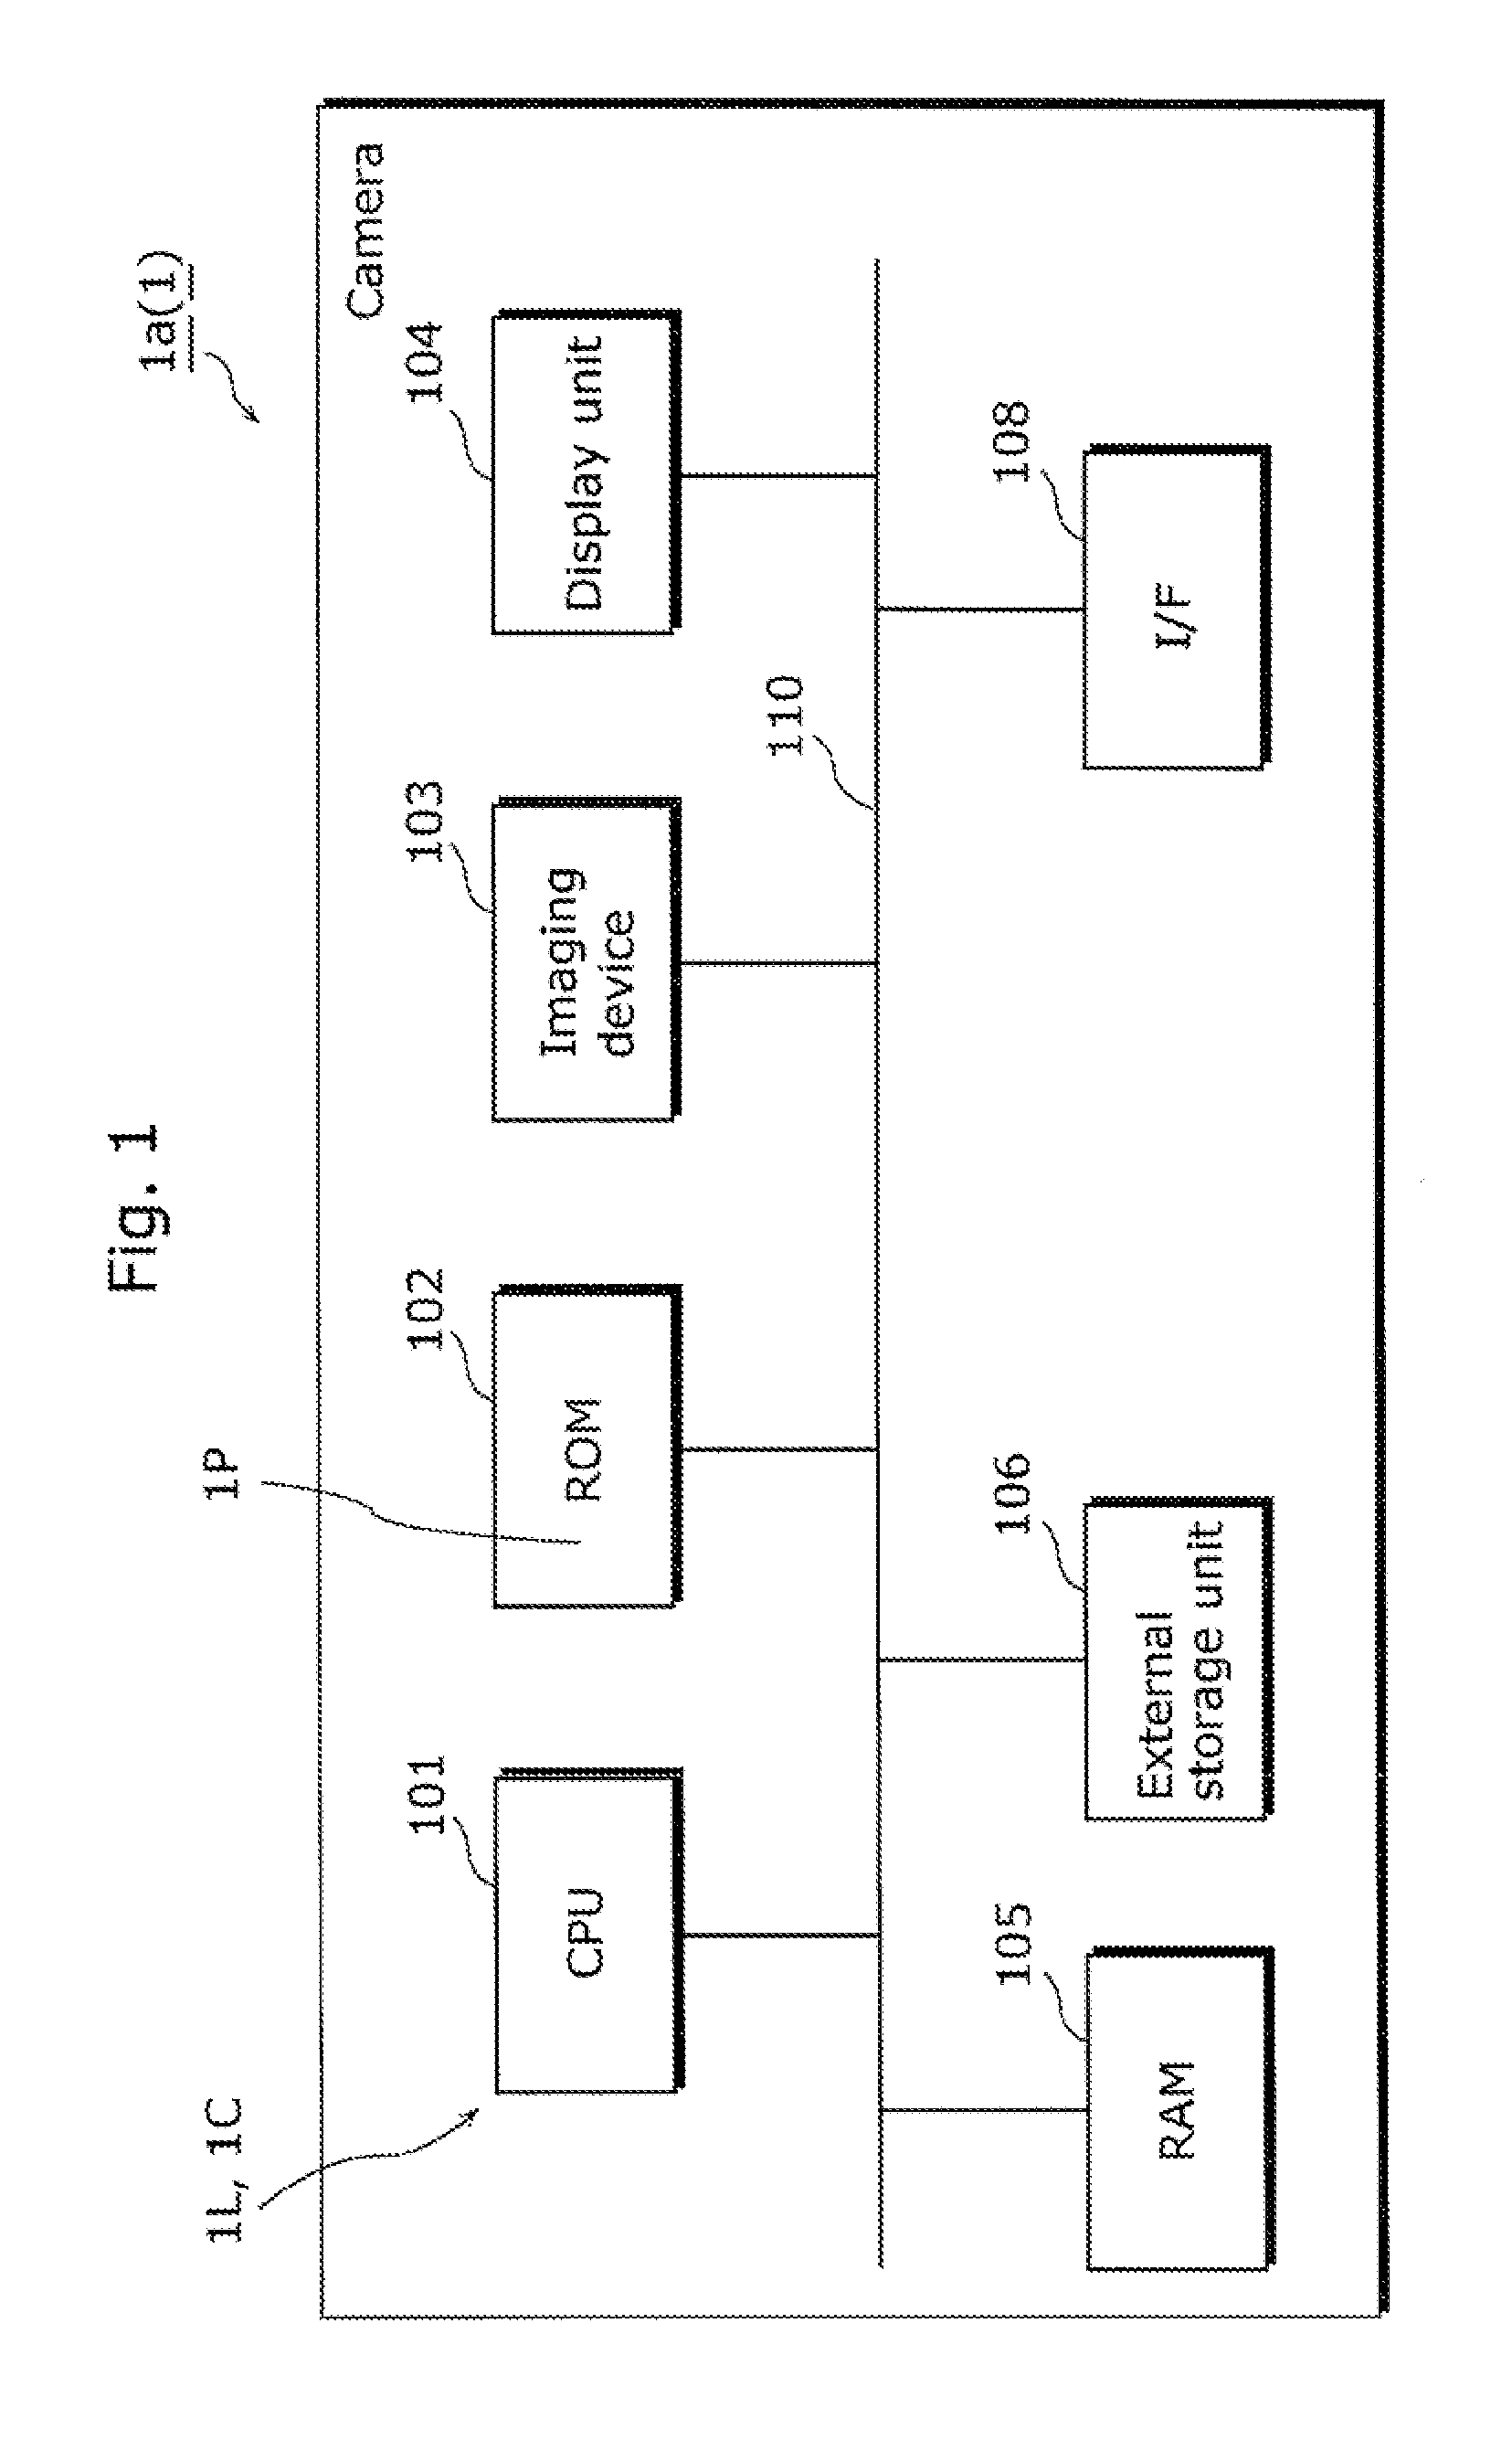 Tracking object selection apparatus, method, program and circuit